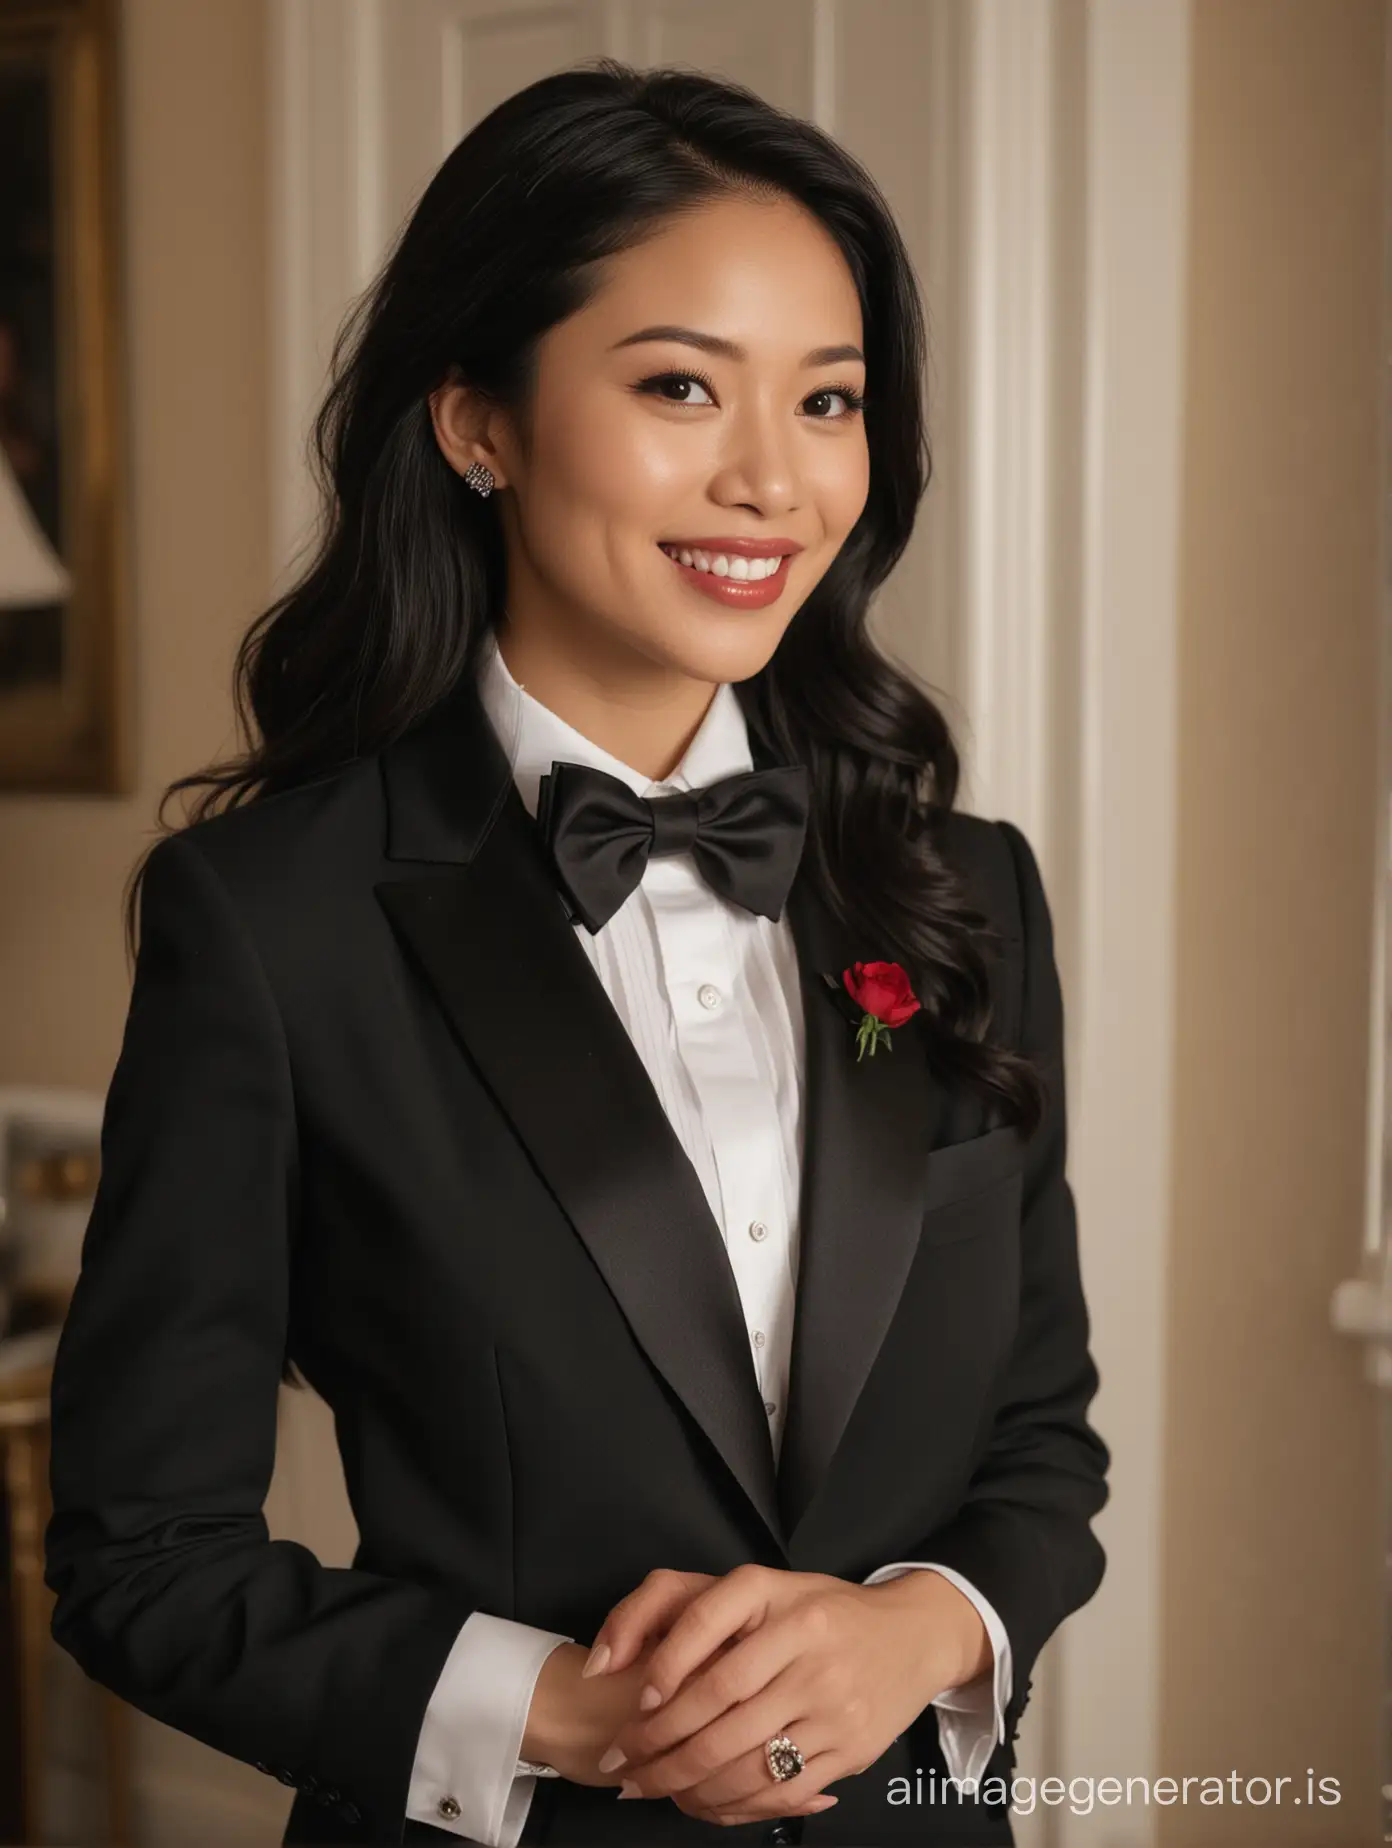 The scene is a dimly lit room in a wealthy mansion. A beautiful 40 year old smiling  vietnamese woman  with tan skin, long black hair, and lipstick, mid-twenties of age, is standing in the corner of a room. She is wearing a tuxedo with a black jacket.  The jacket has a corsage. Her shirt is white with double french cuffs and a wing collar.  Her bowtie is black.   Her cufflinks are large and black.  